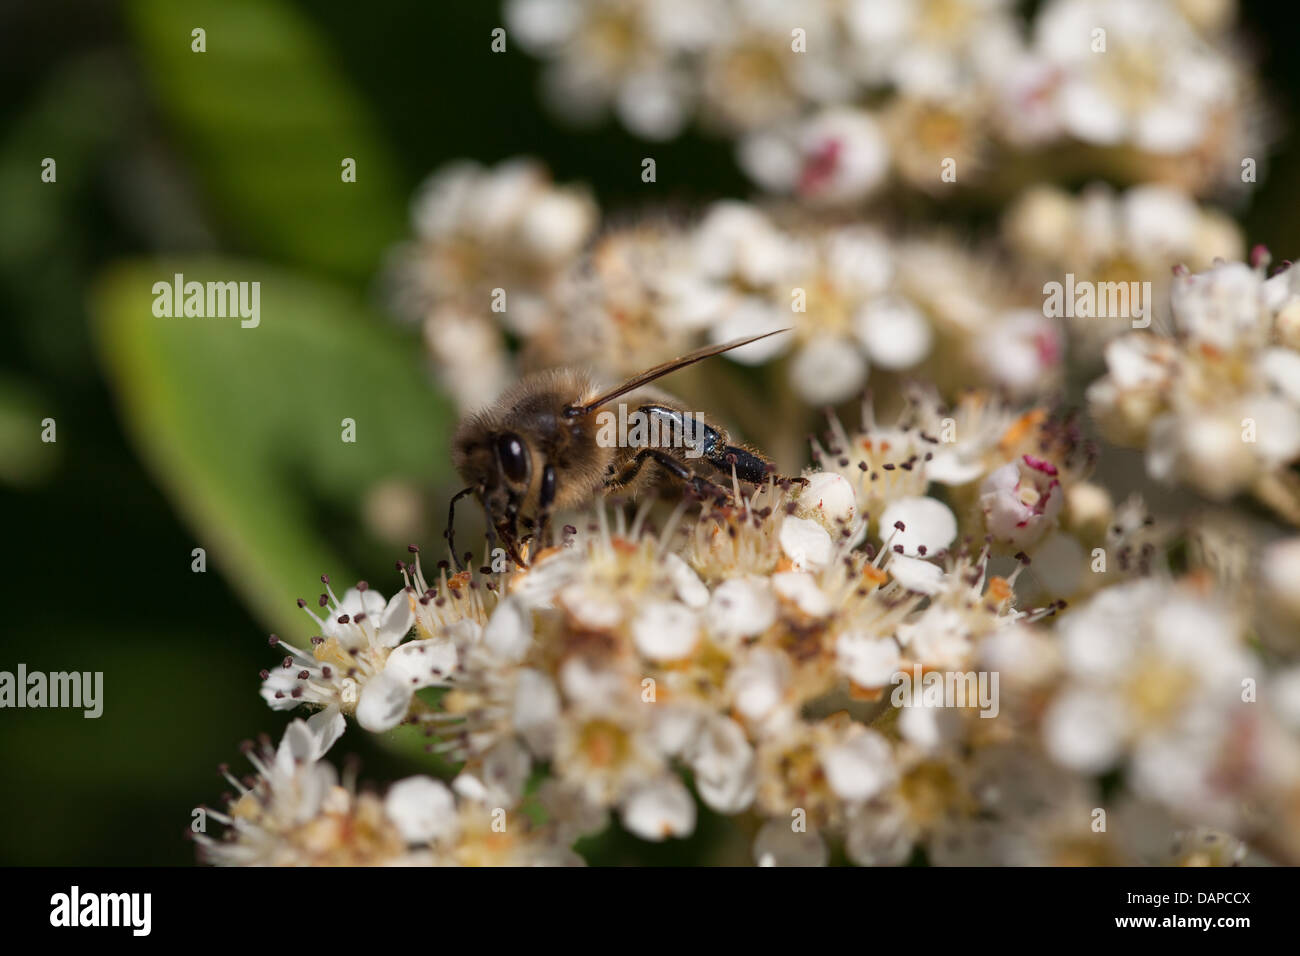 Foraging bee on Cotoneaster flowers in the light summer garden Stock Photo